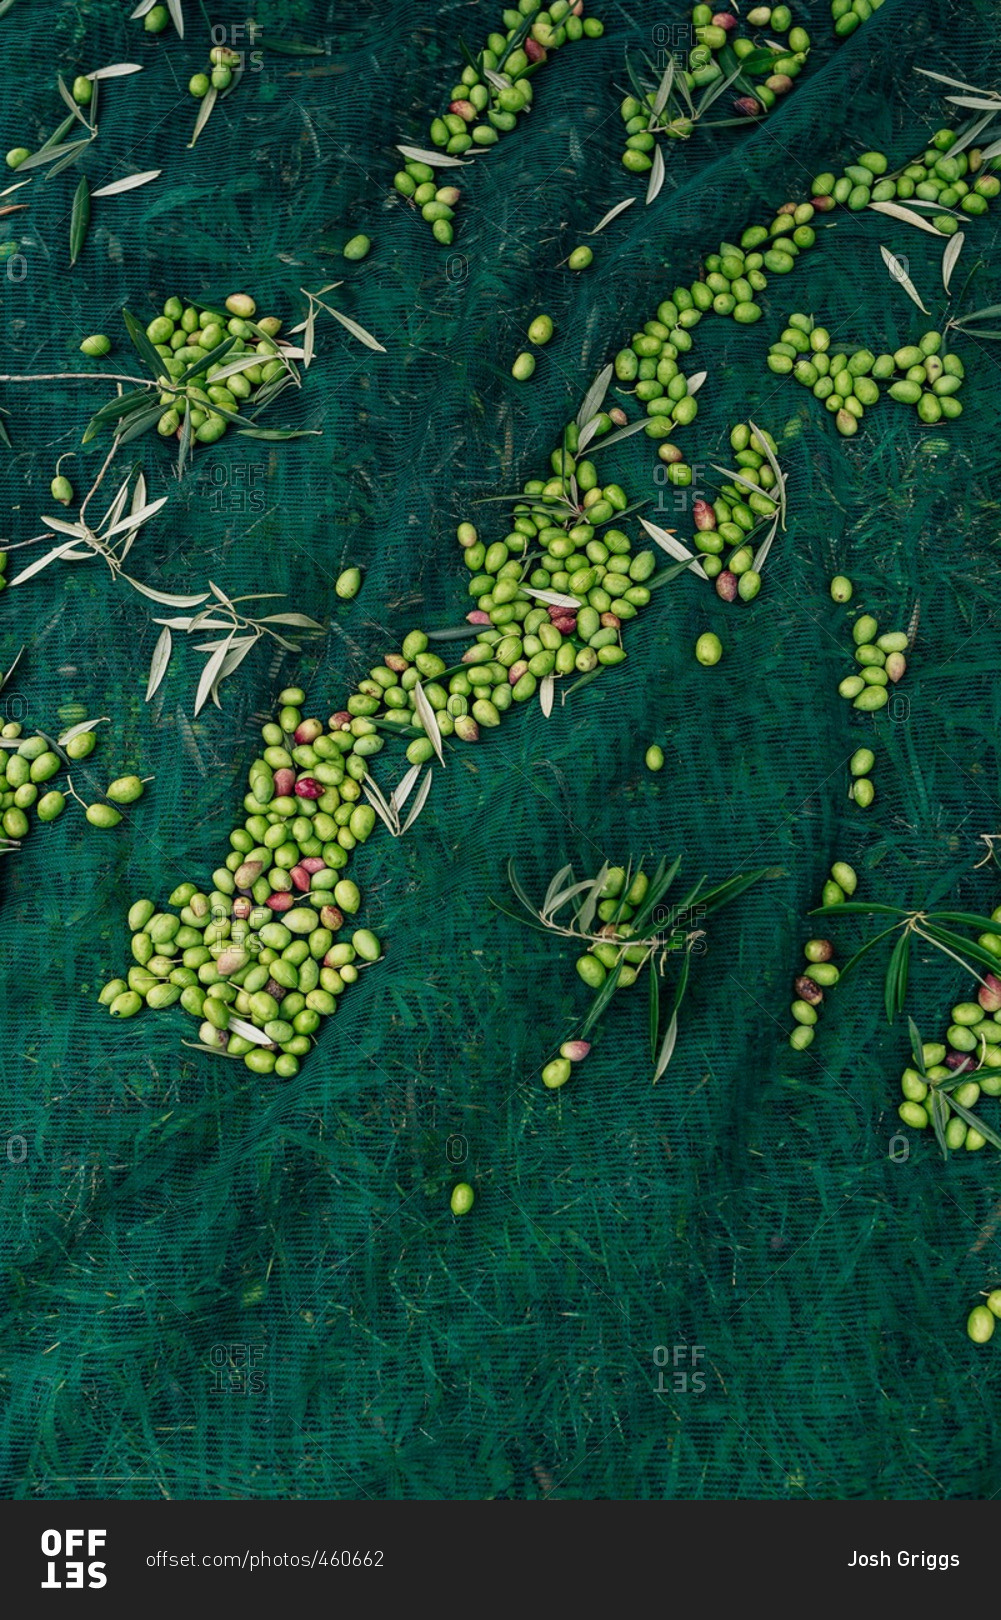 Harvested olive crop on netting